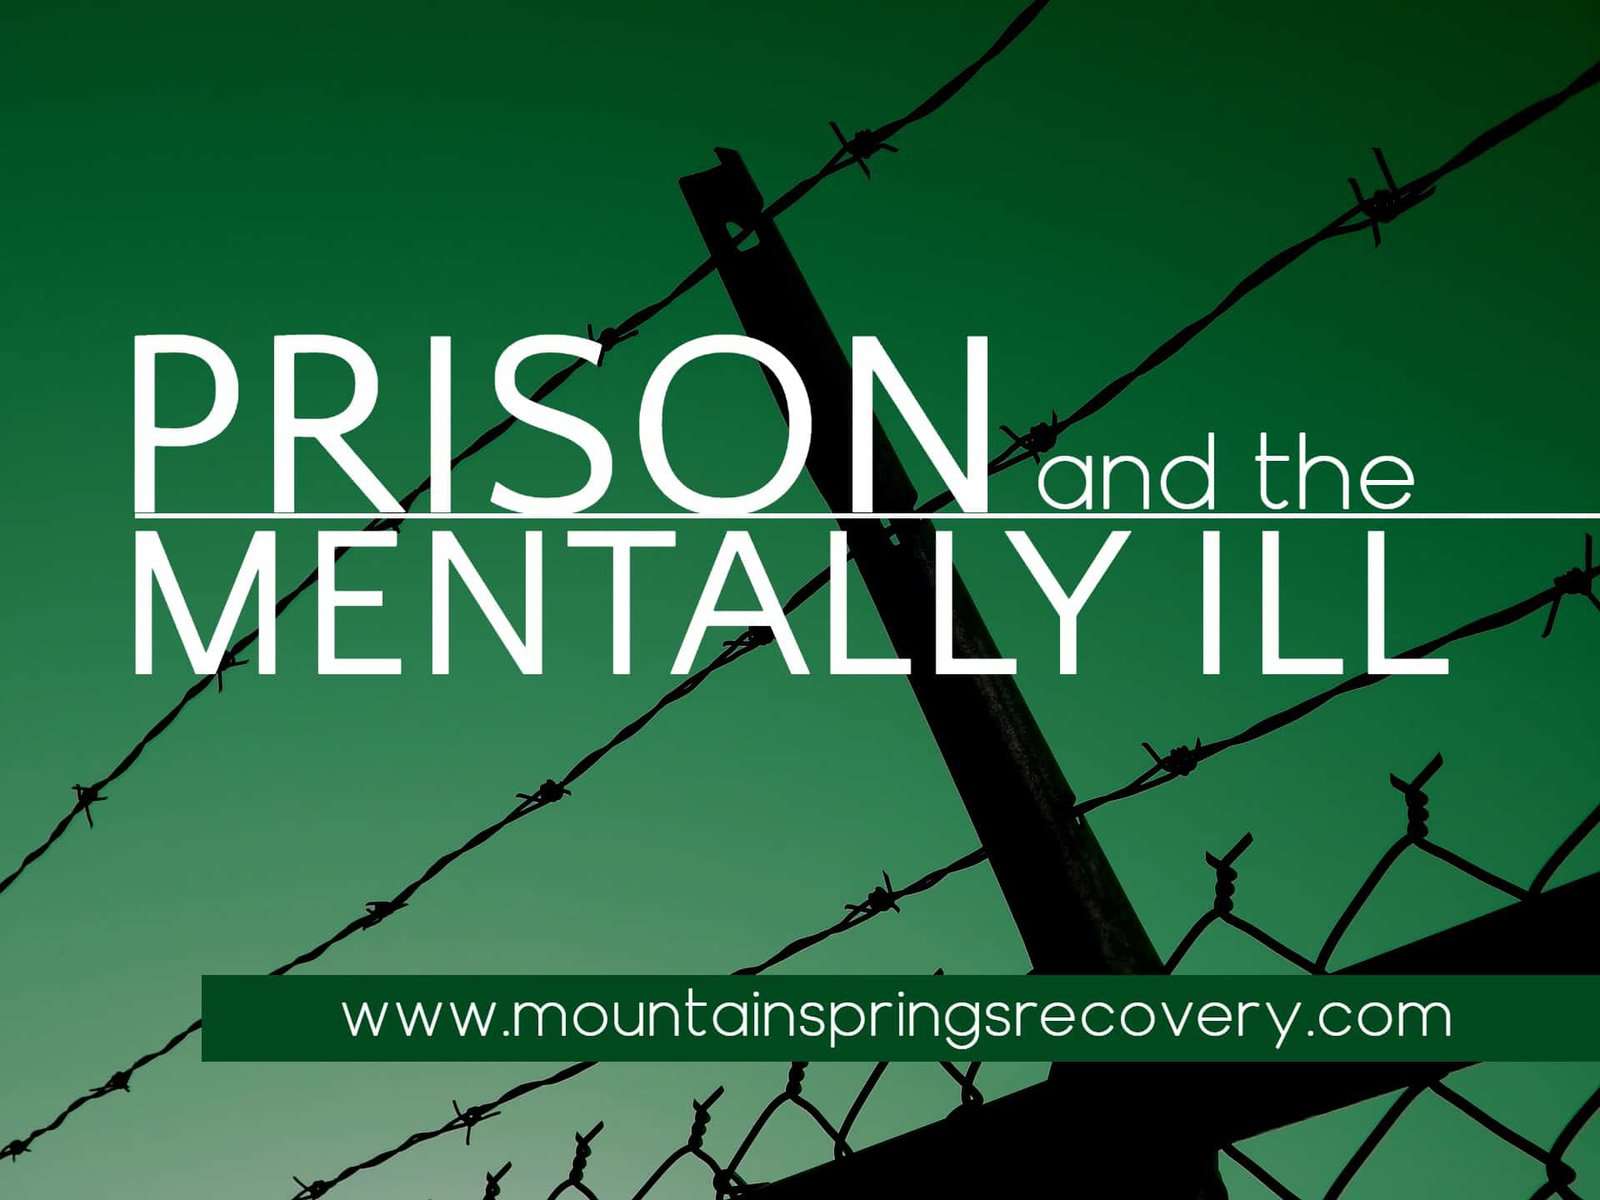 Prison and Mental Health